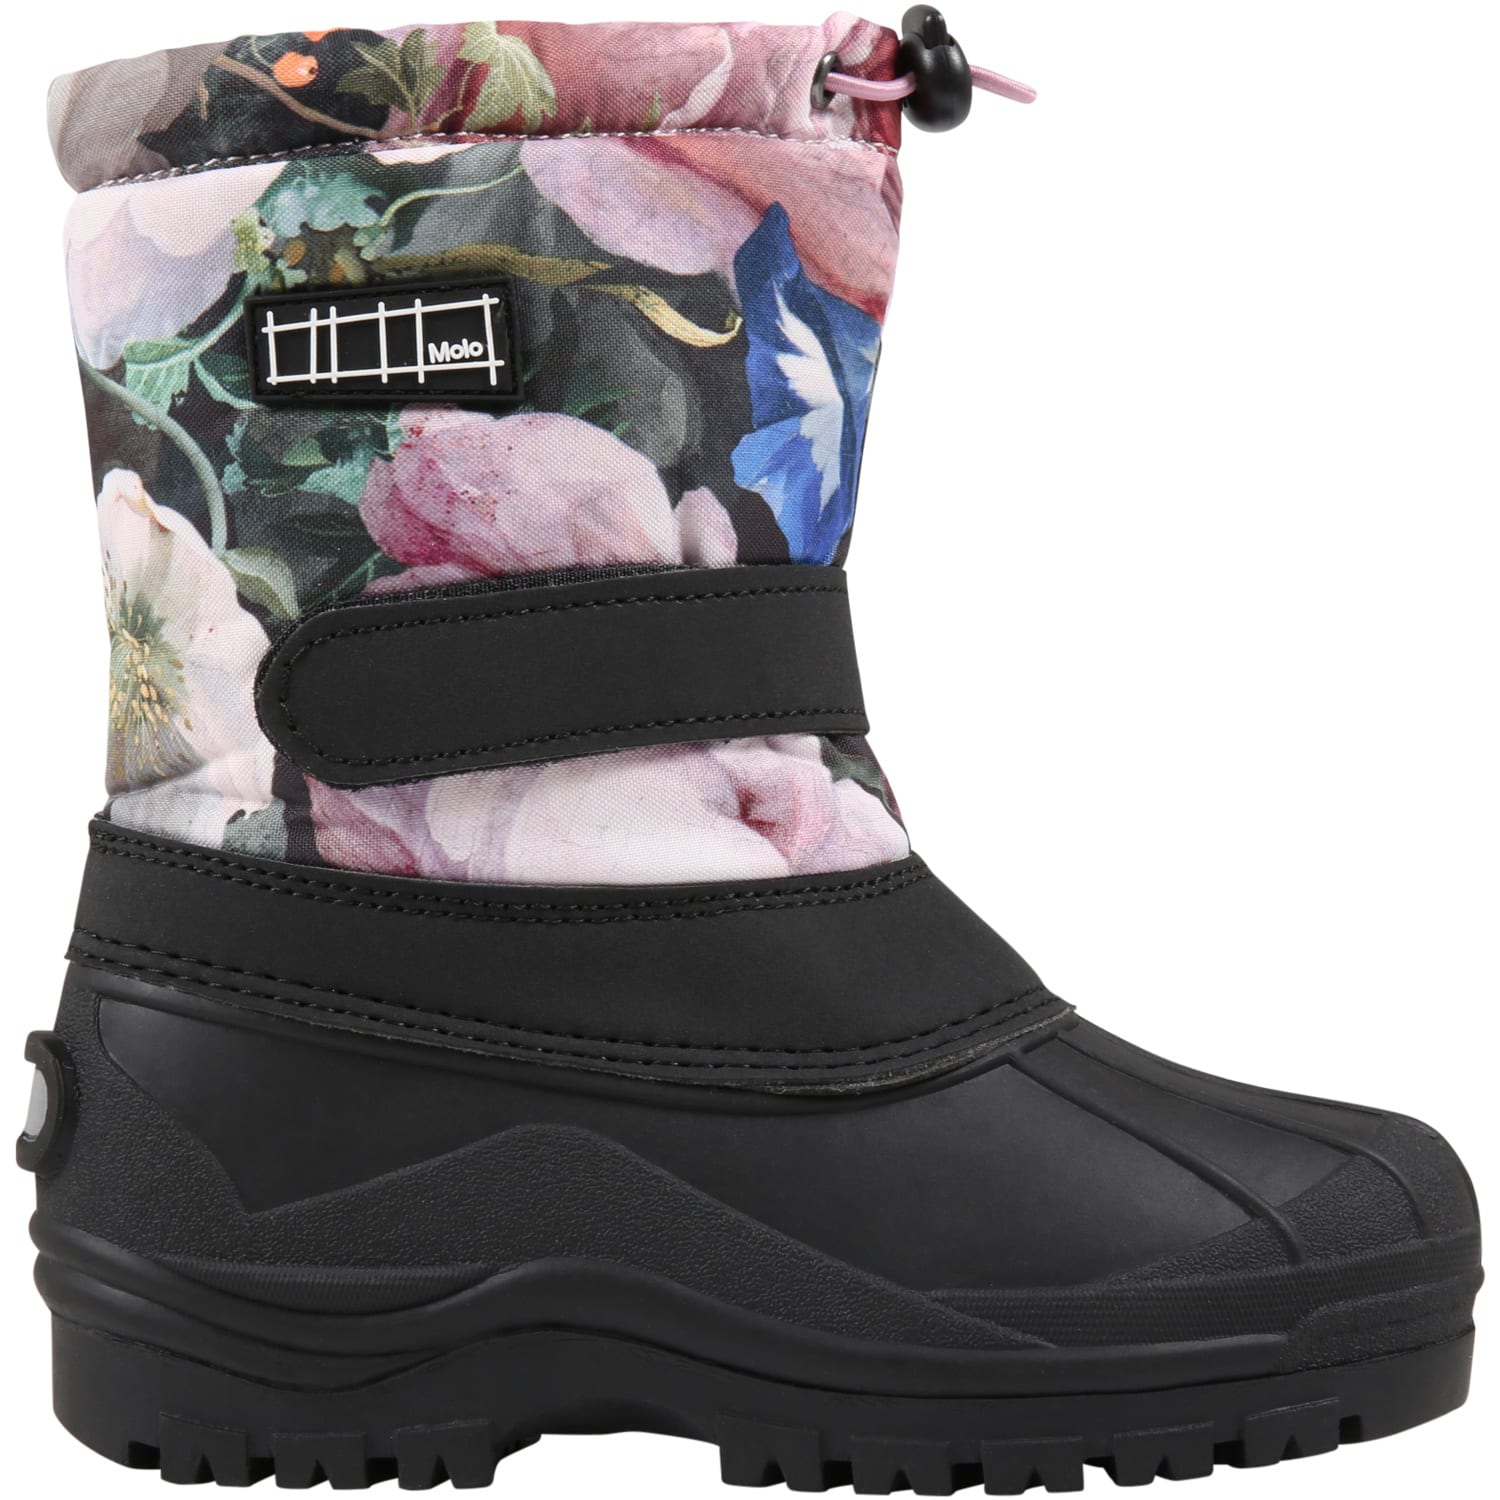 Molo Multicolor Ski Boots For Girl With Flowers